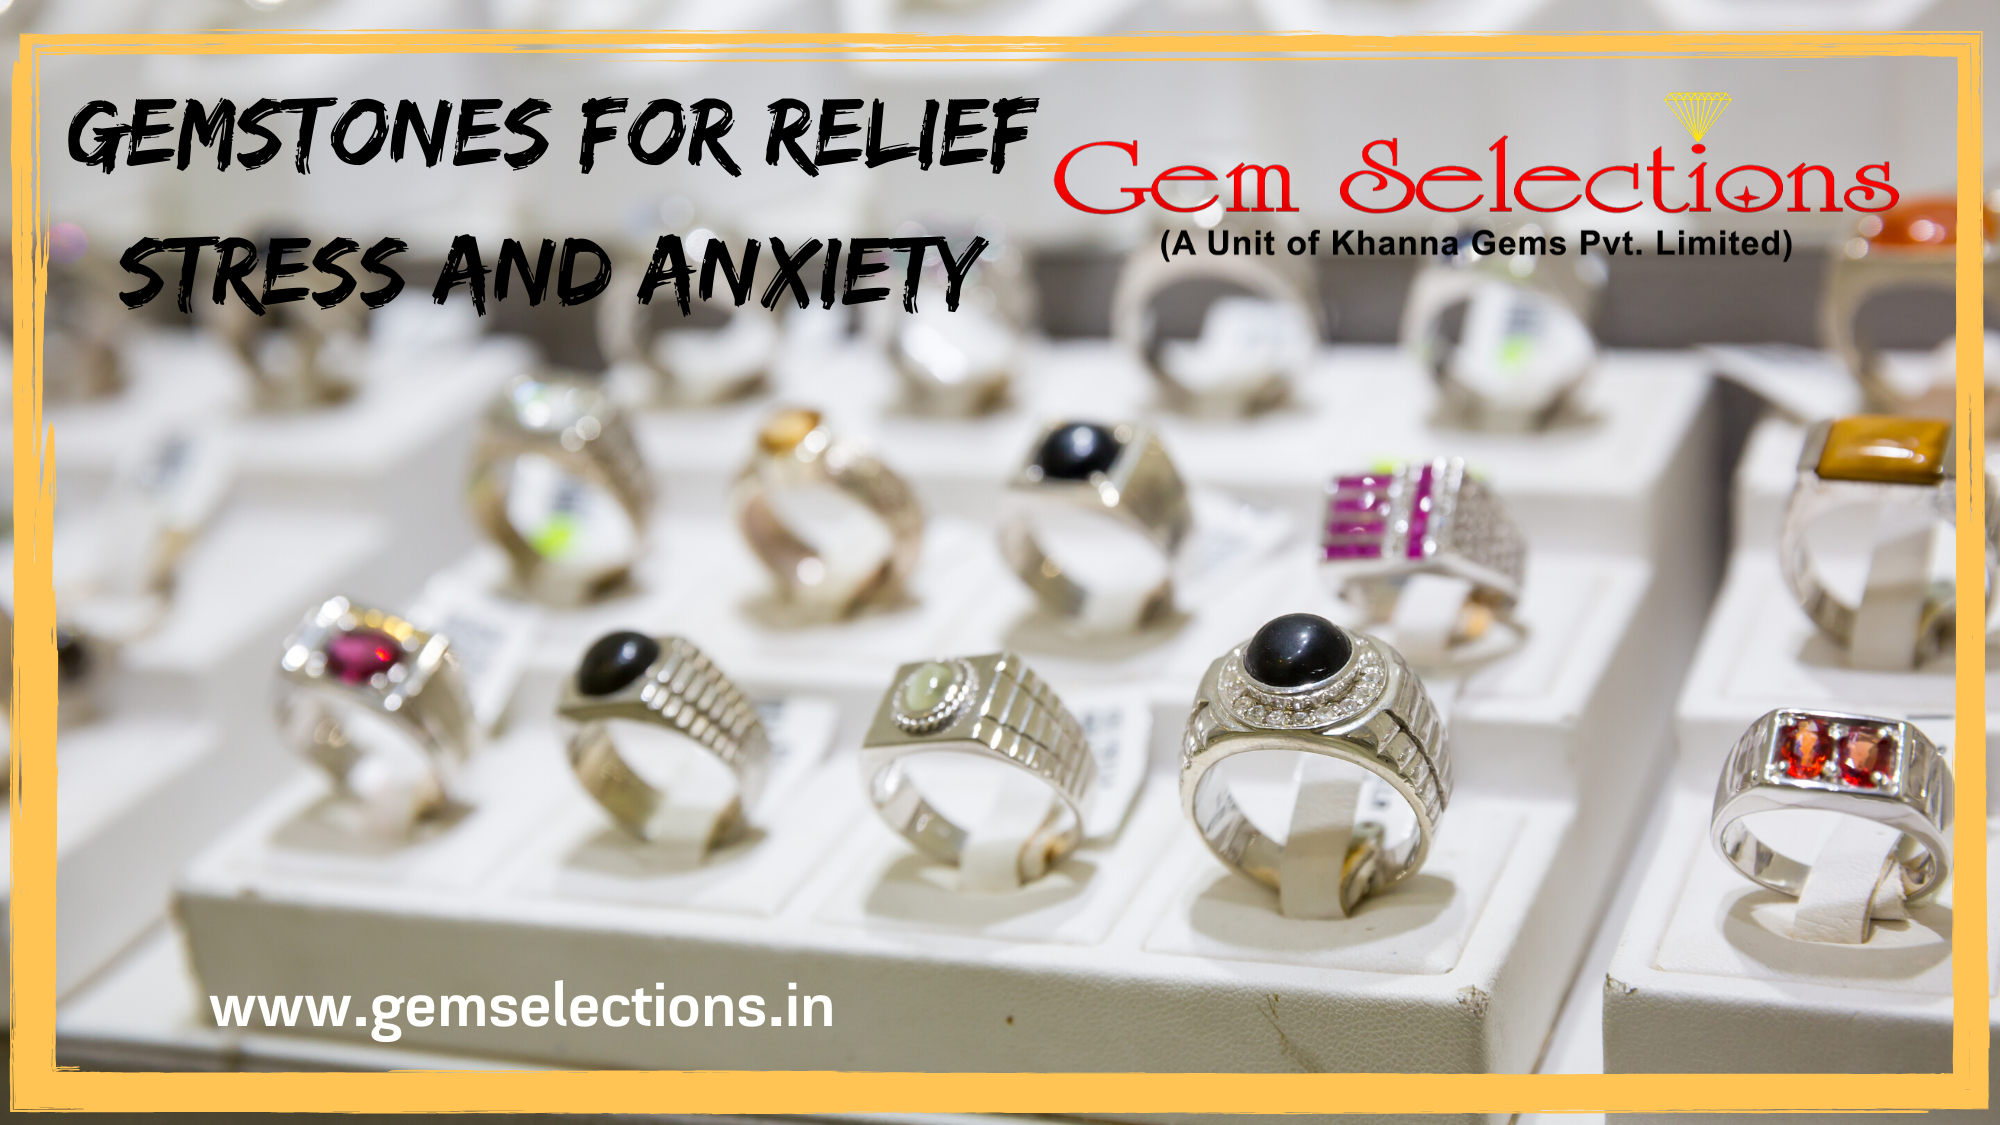 Powerful gemstones for relieving anxiety, stress, and worry